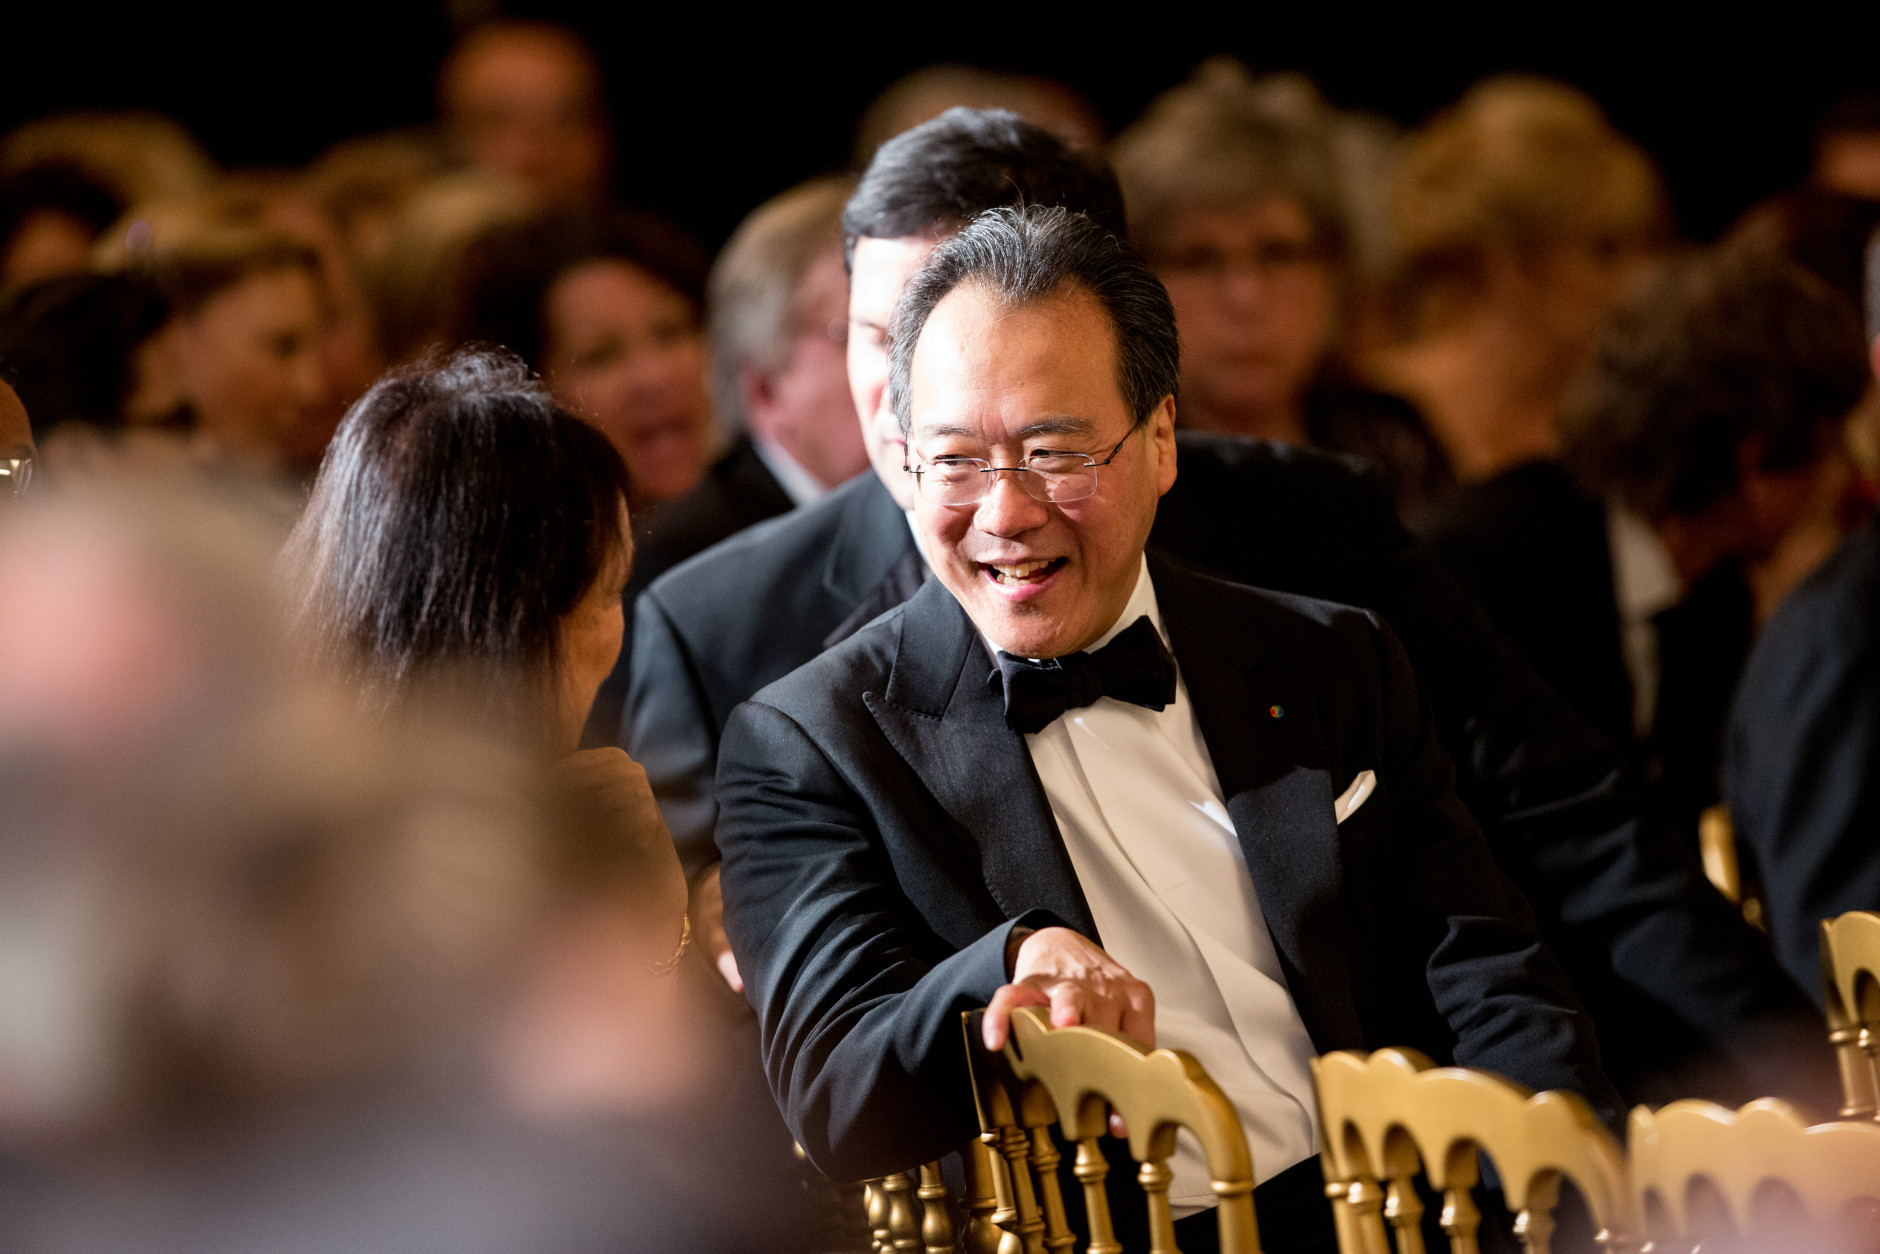 Chinese American cellist Yo-Yo Ma arrives at the 2015 Kennedy Center Honors reception in the East Room of the White House, Sunday, Dec. 6, 2015, in Washington. The 2015 Kennedy Center Honors Honorees are singer-songwriter Carole King, filmmaker George Lucas, actress and singer Rita Moreno, conductor Seiji Ozawa, and actress Cicely Tyson. (AP Photo/Andrew Harnik)